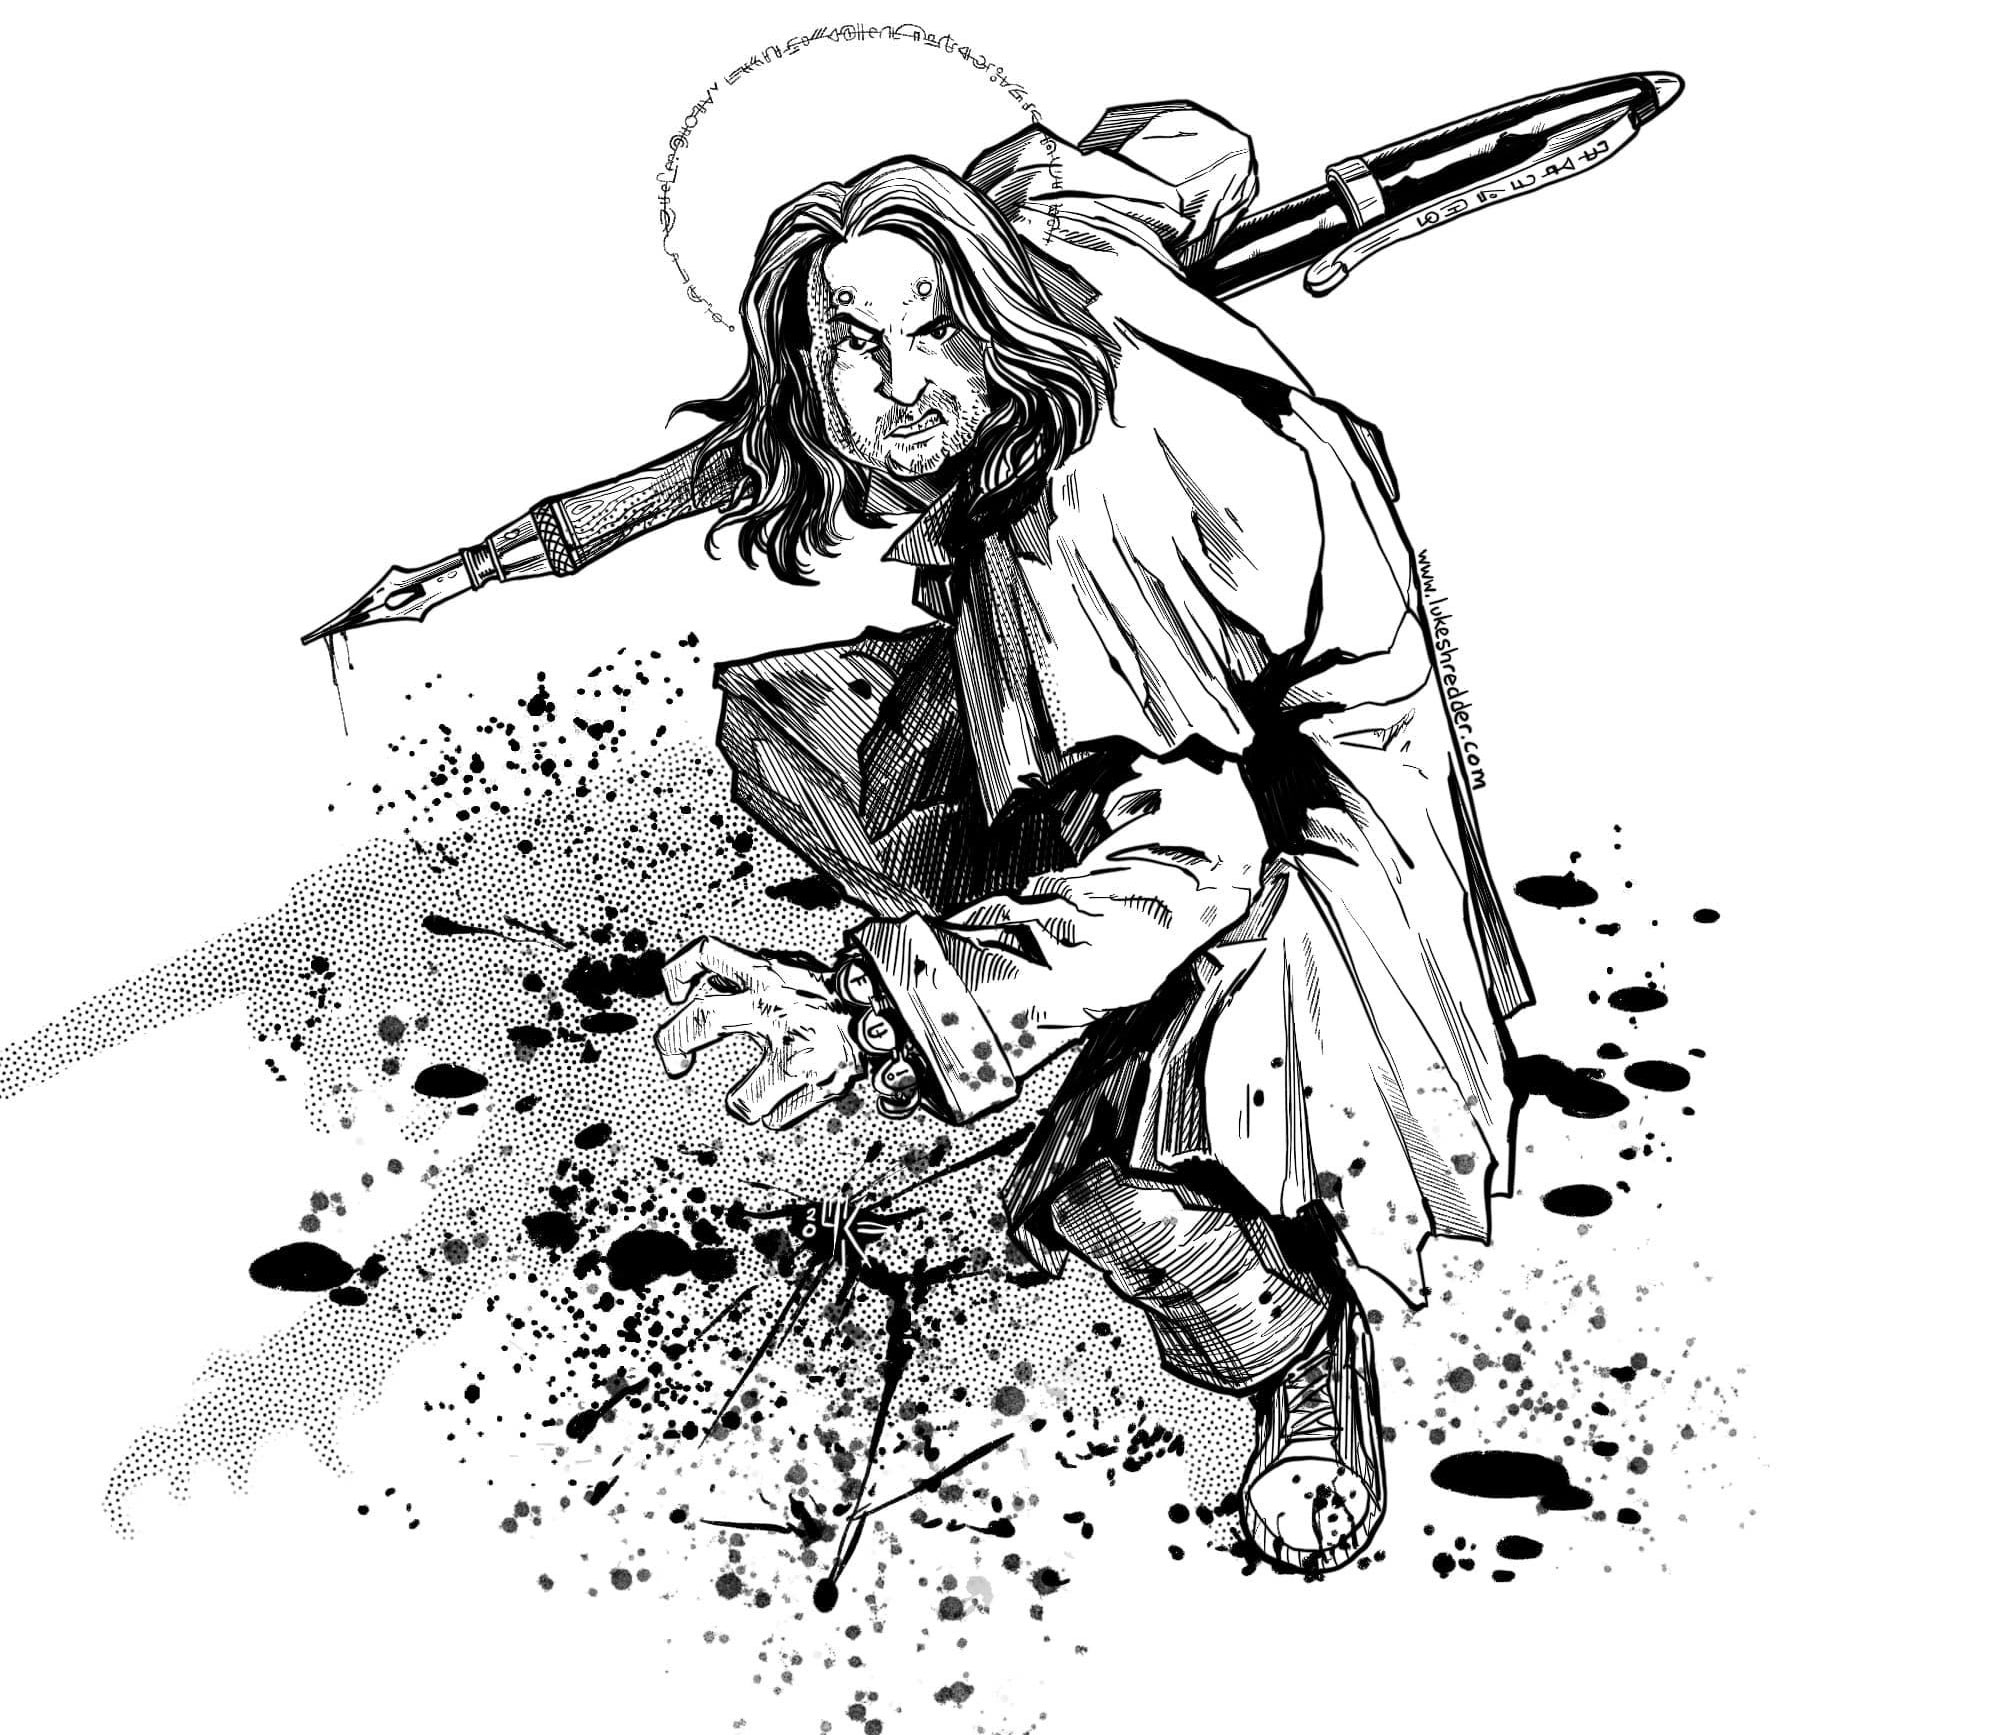 Illustration of Jim in an aggressive stance, holding a massive fountain pen like a weapon, covered in spatters of ink reminiscent of blood